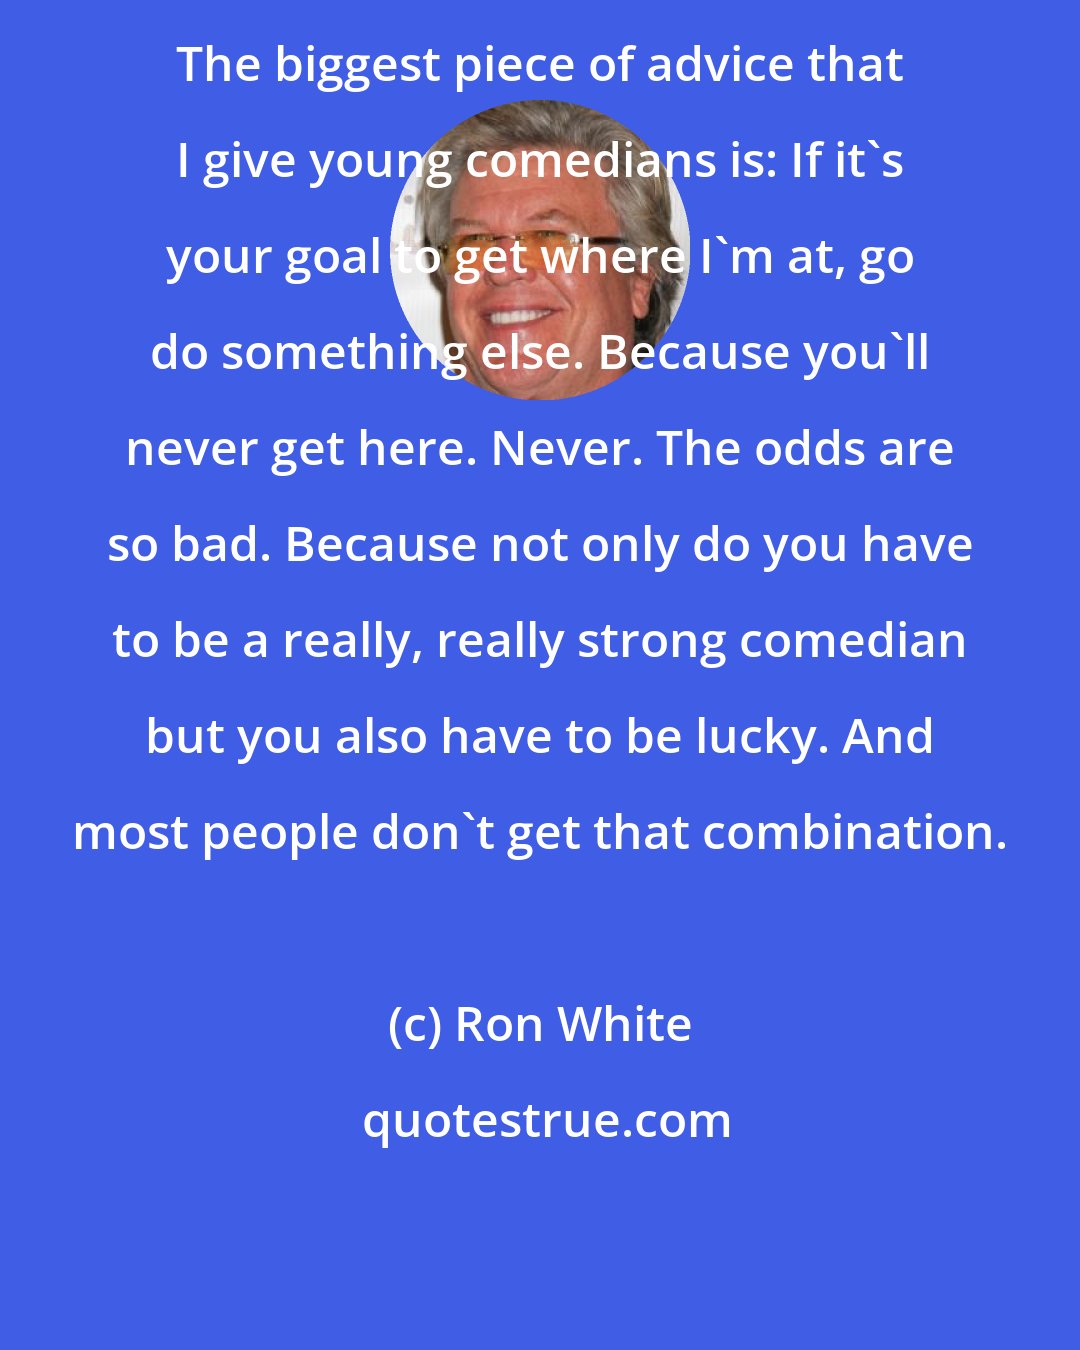 Ron White: The biggest piece of advice that I give young comedians is: If it's your goal to get where I'm at, go do something else. Because you'll never get here. Never. The odds are so bad. Because not only do you have to be a really, really strong comedian but you also have to be lucky. And most people don't get that combination.